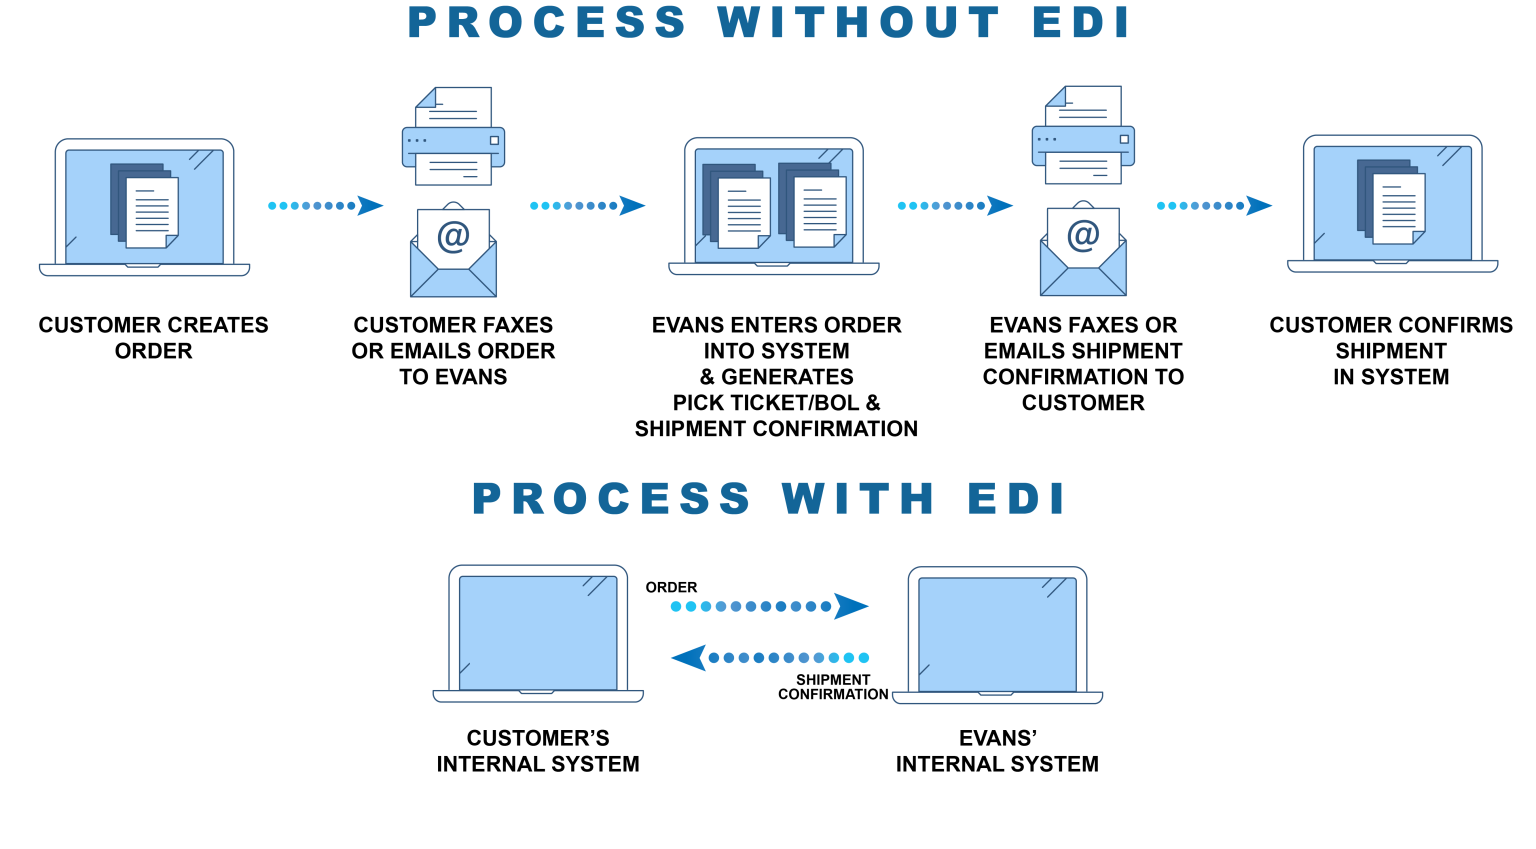 Process With vs Without EDI